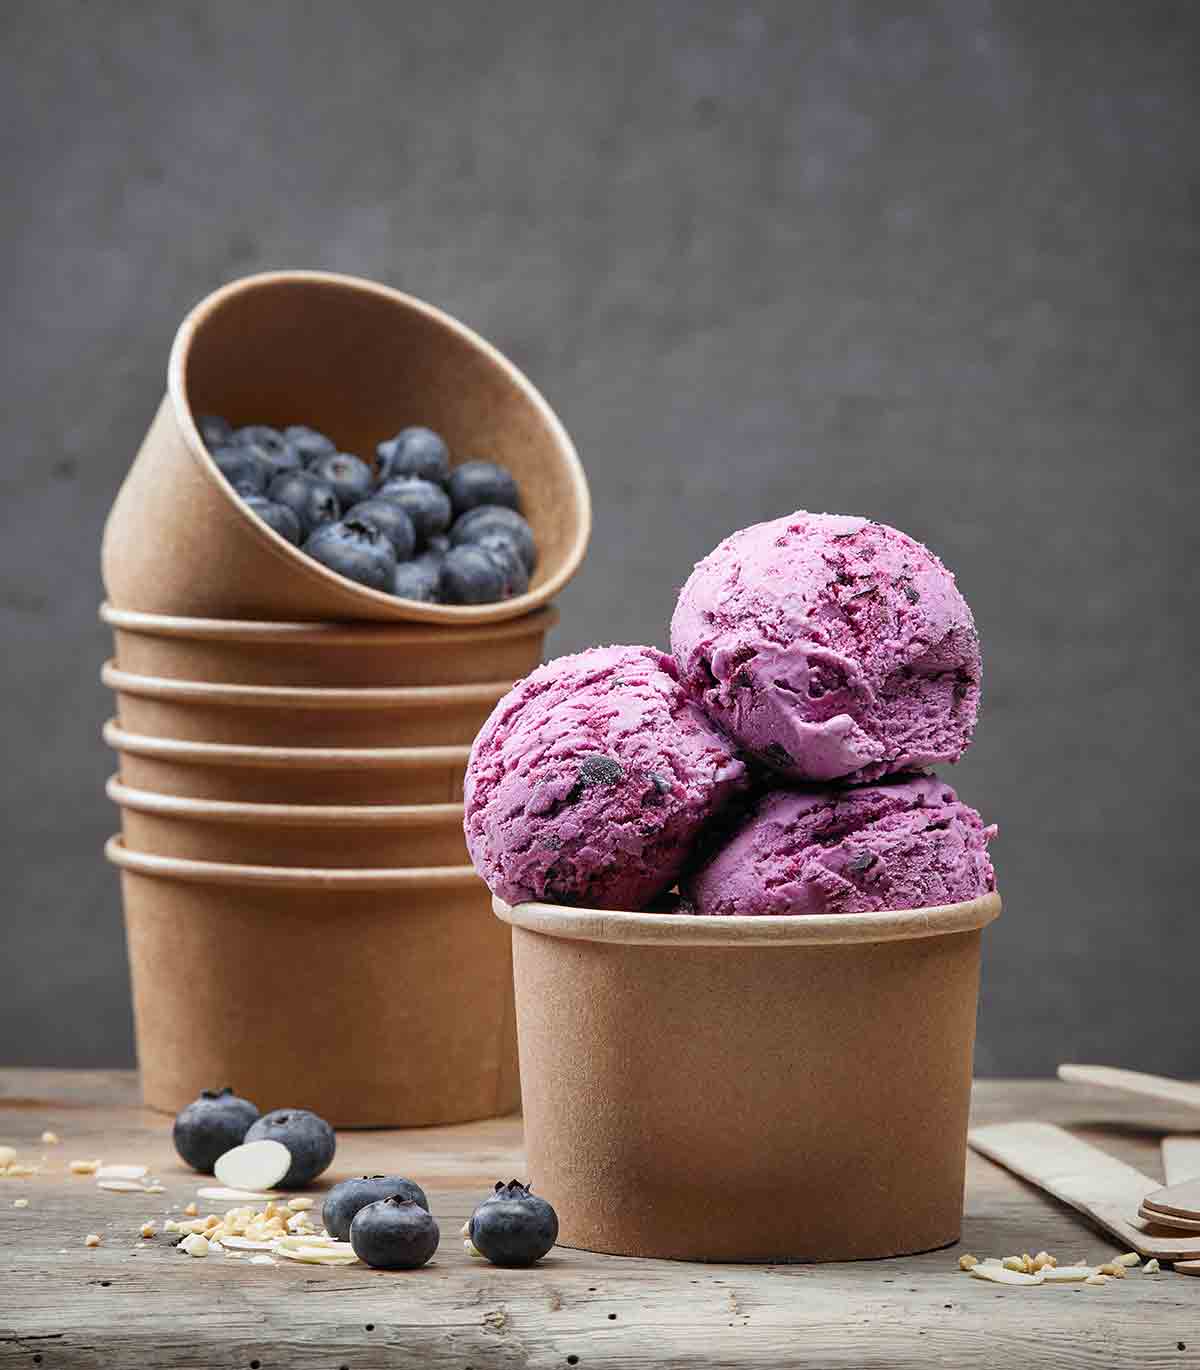 A brown container with three scoops of blueberry ice cream, in the back a stack of containers